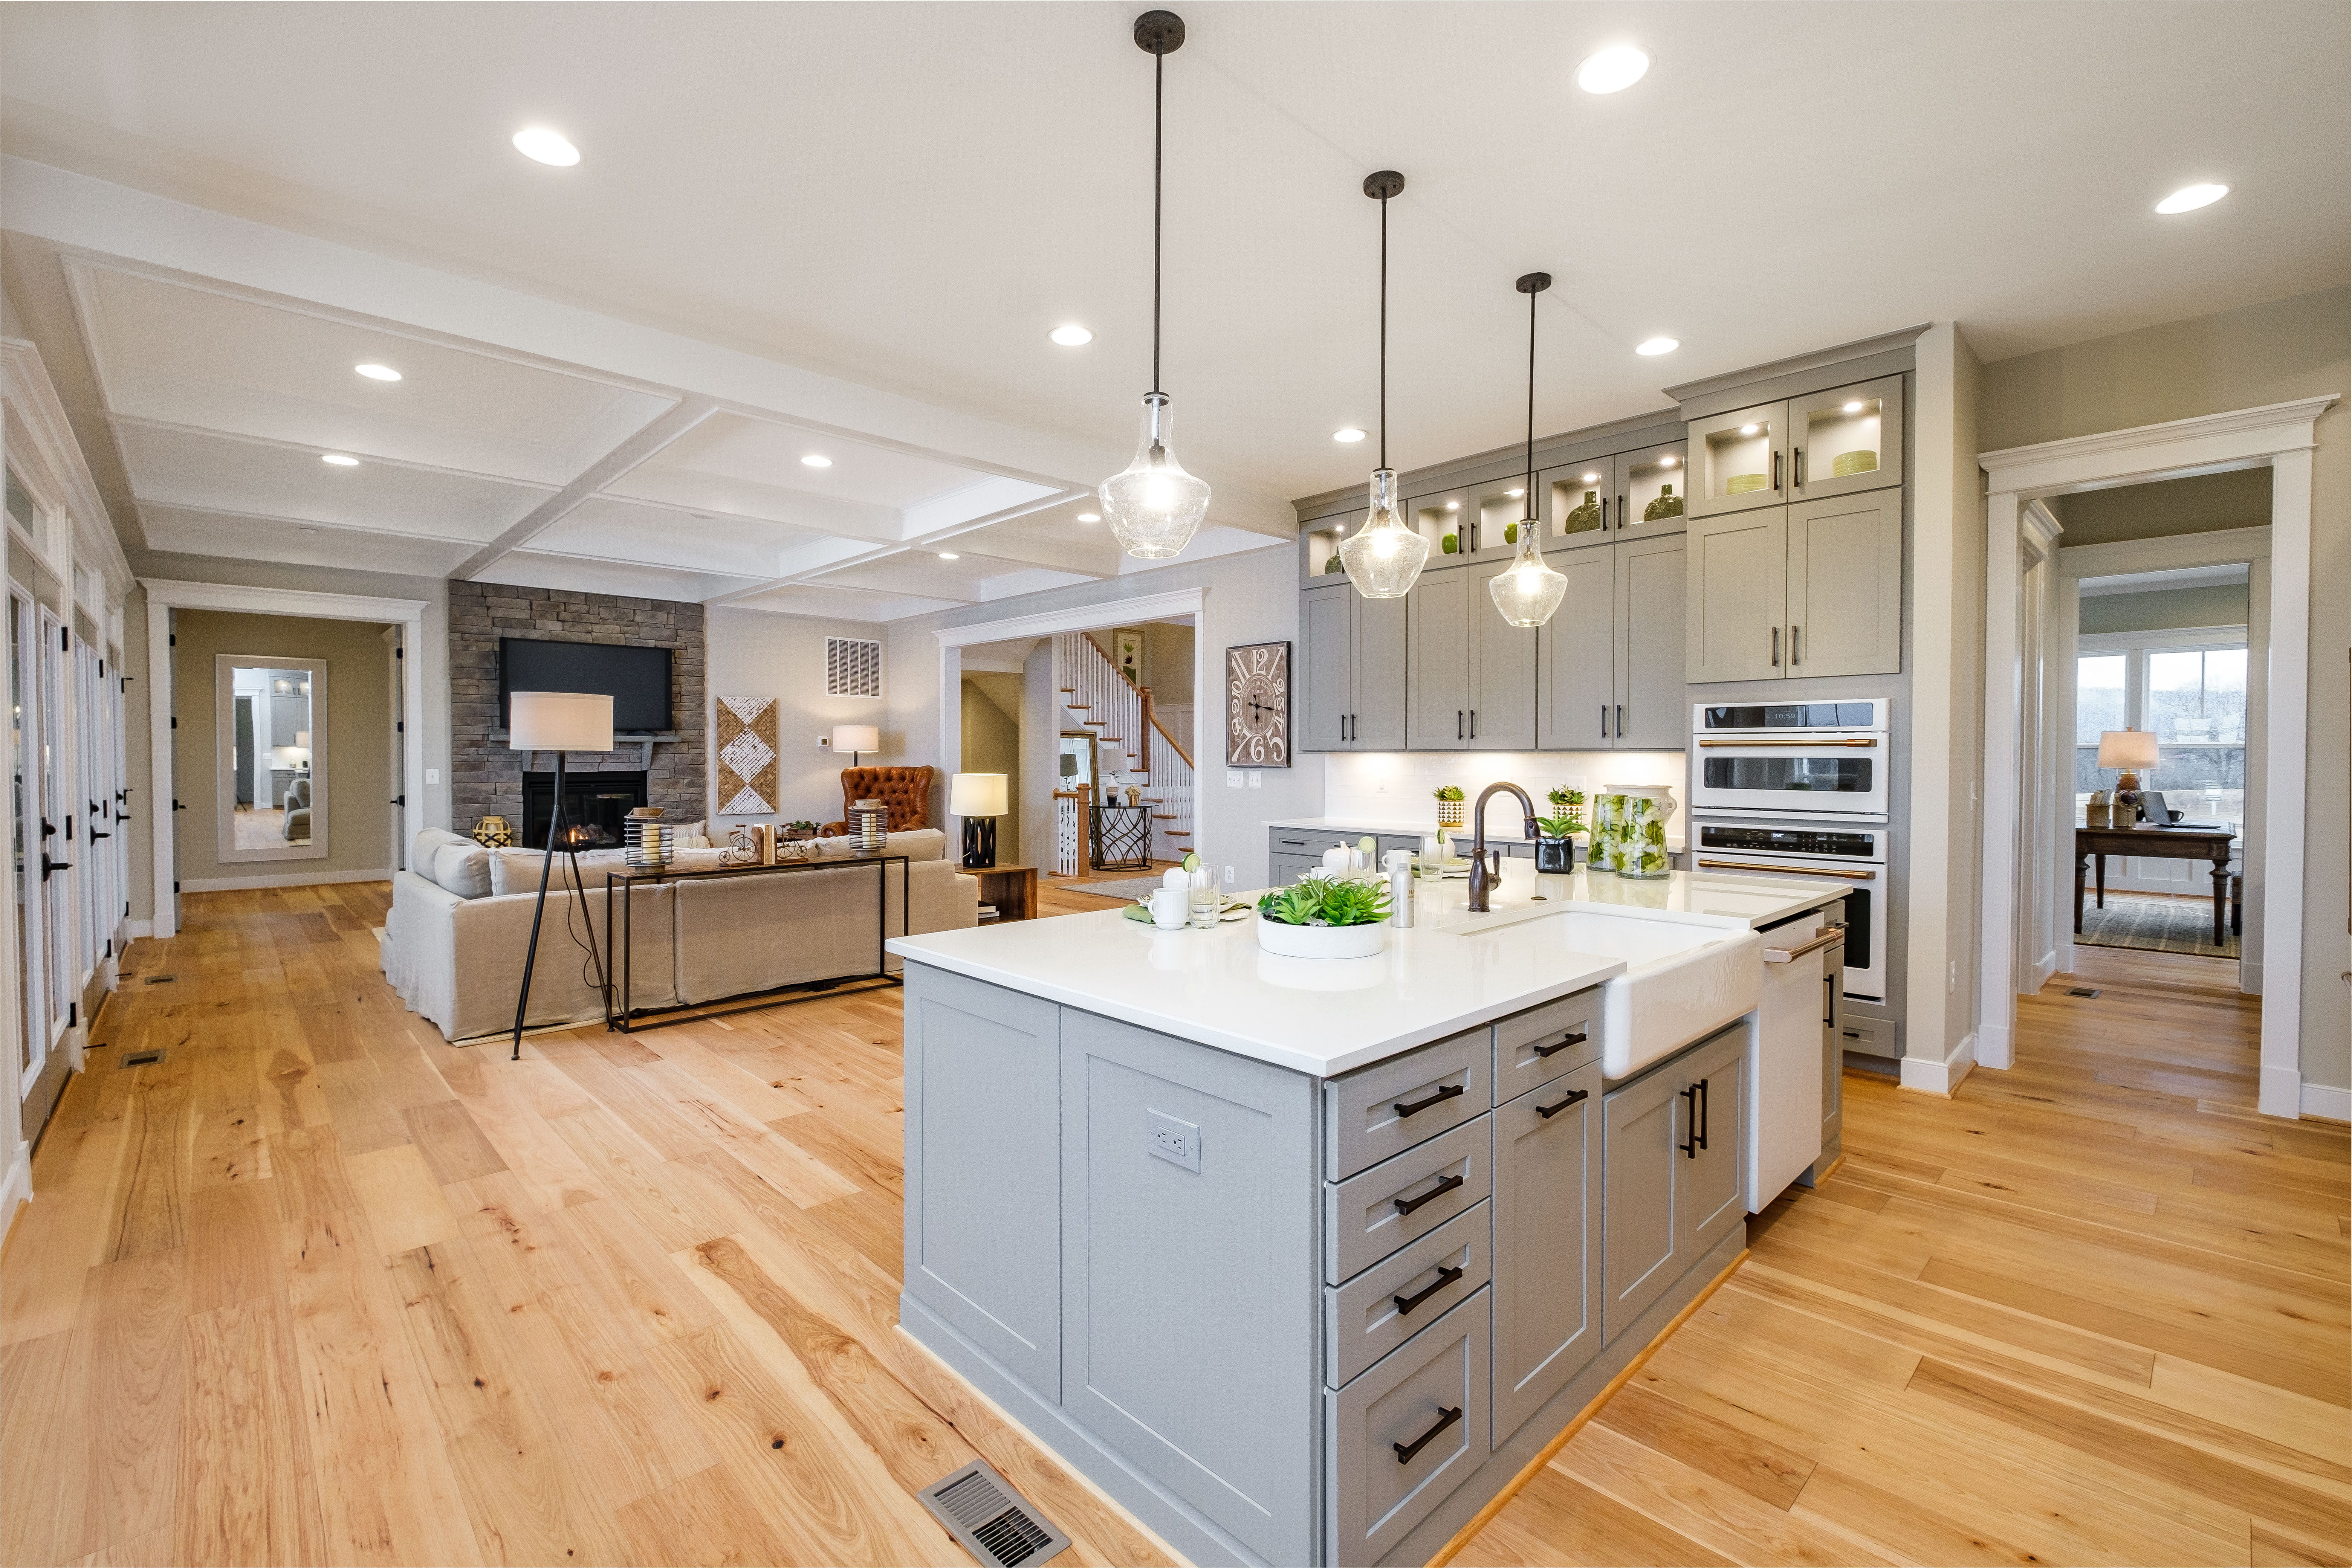 Miller's Reserve's Robey Floorplan kitchen and great room